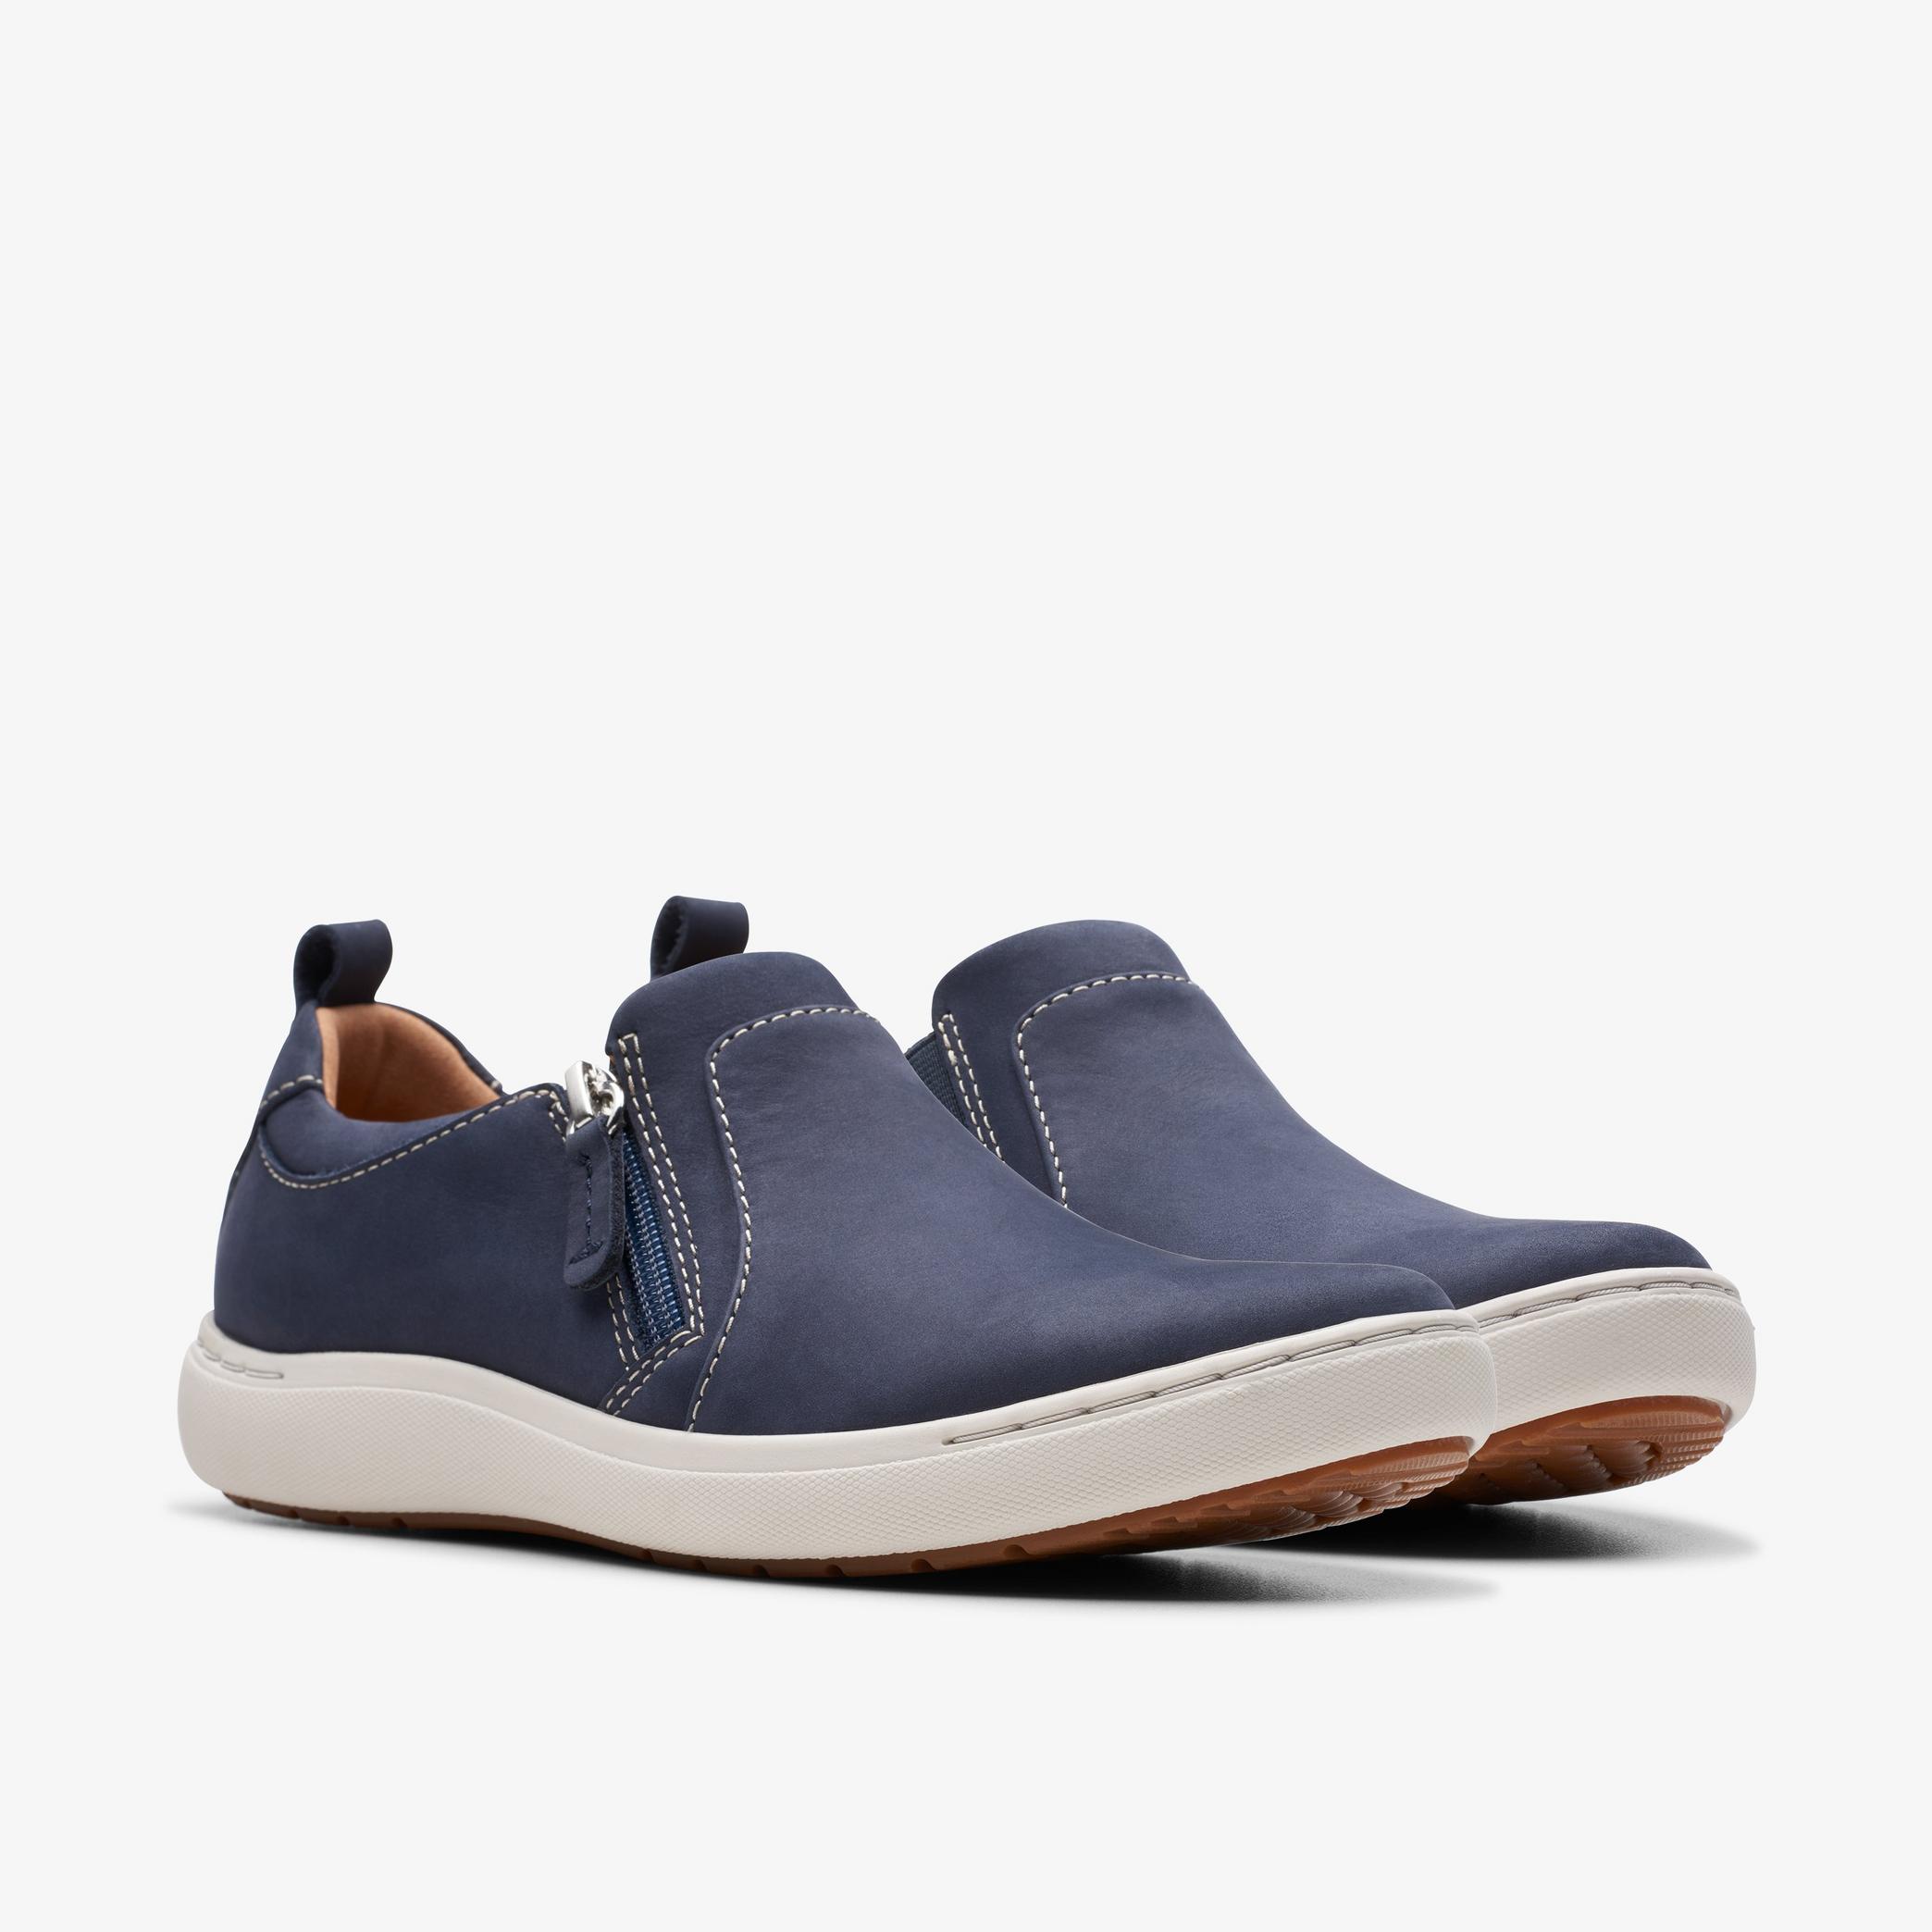 Nalle Lilac Navy Nubuck Sneakers, view 4 of 7